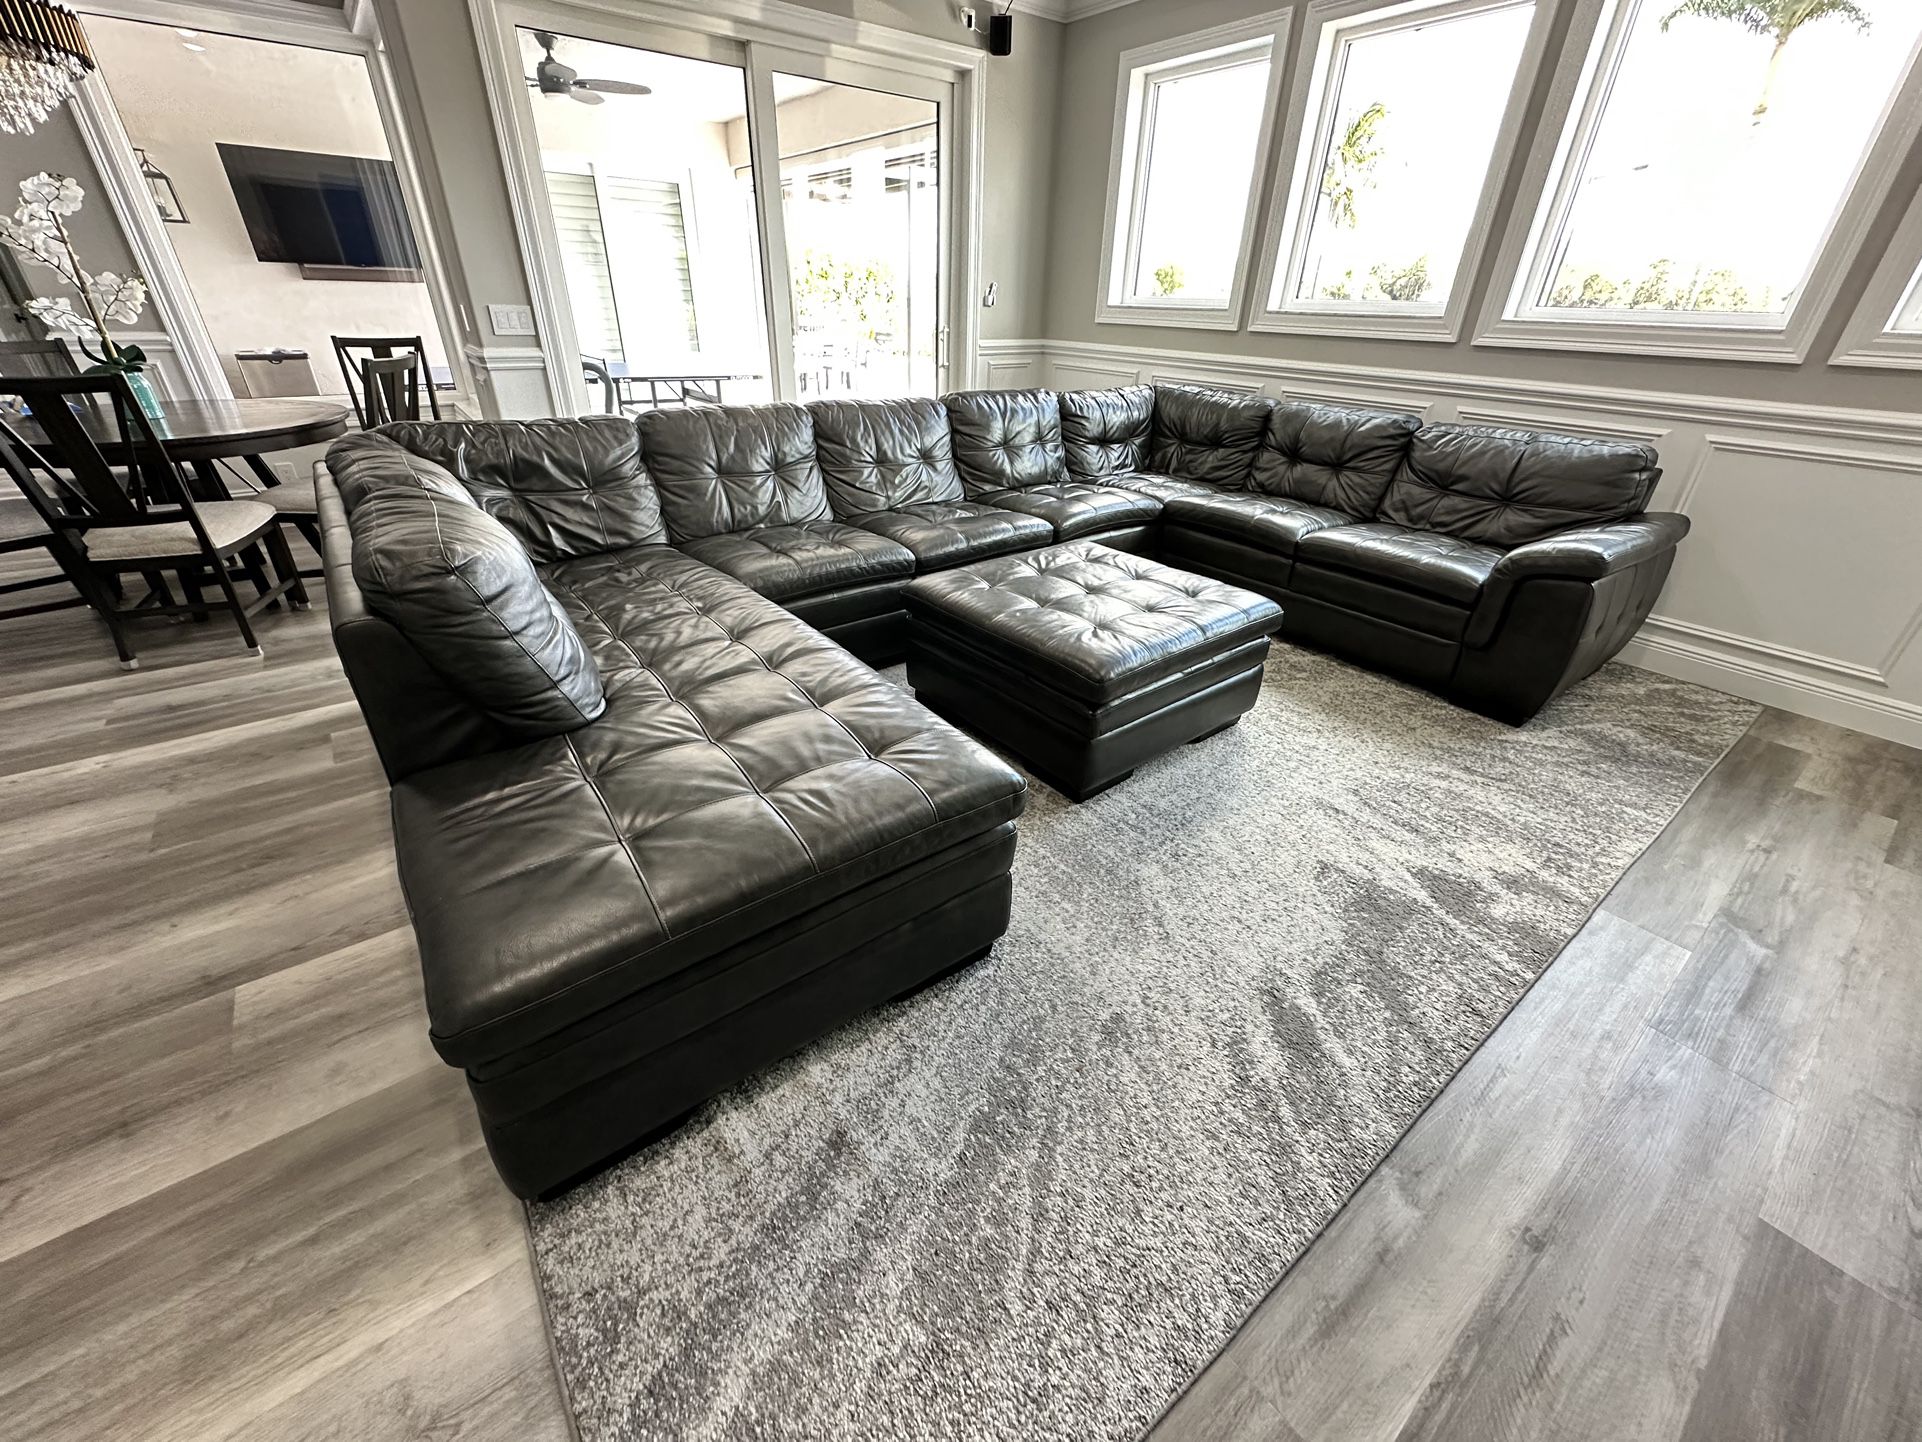 Leather gray Sectional Sofa From City Furniture 